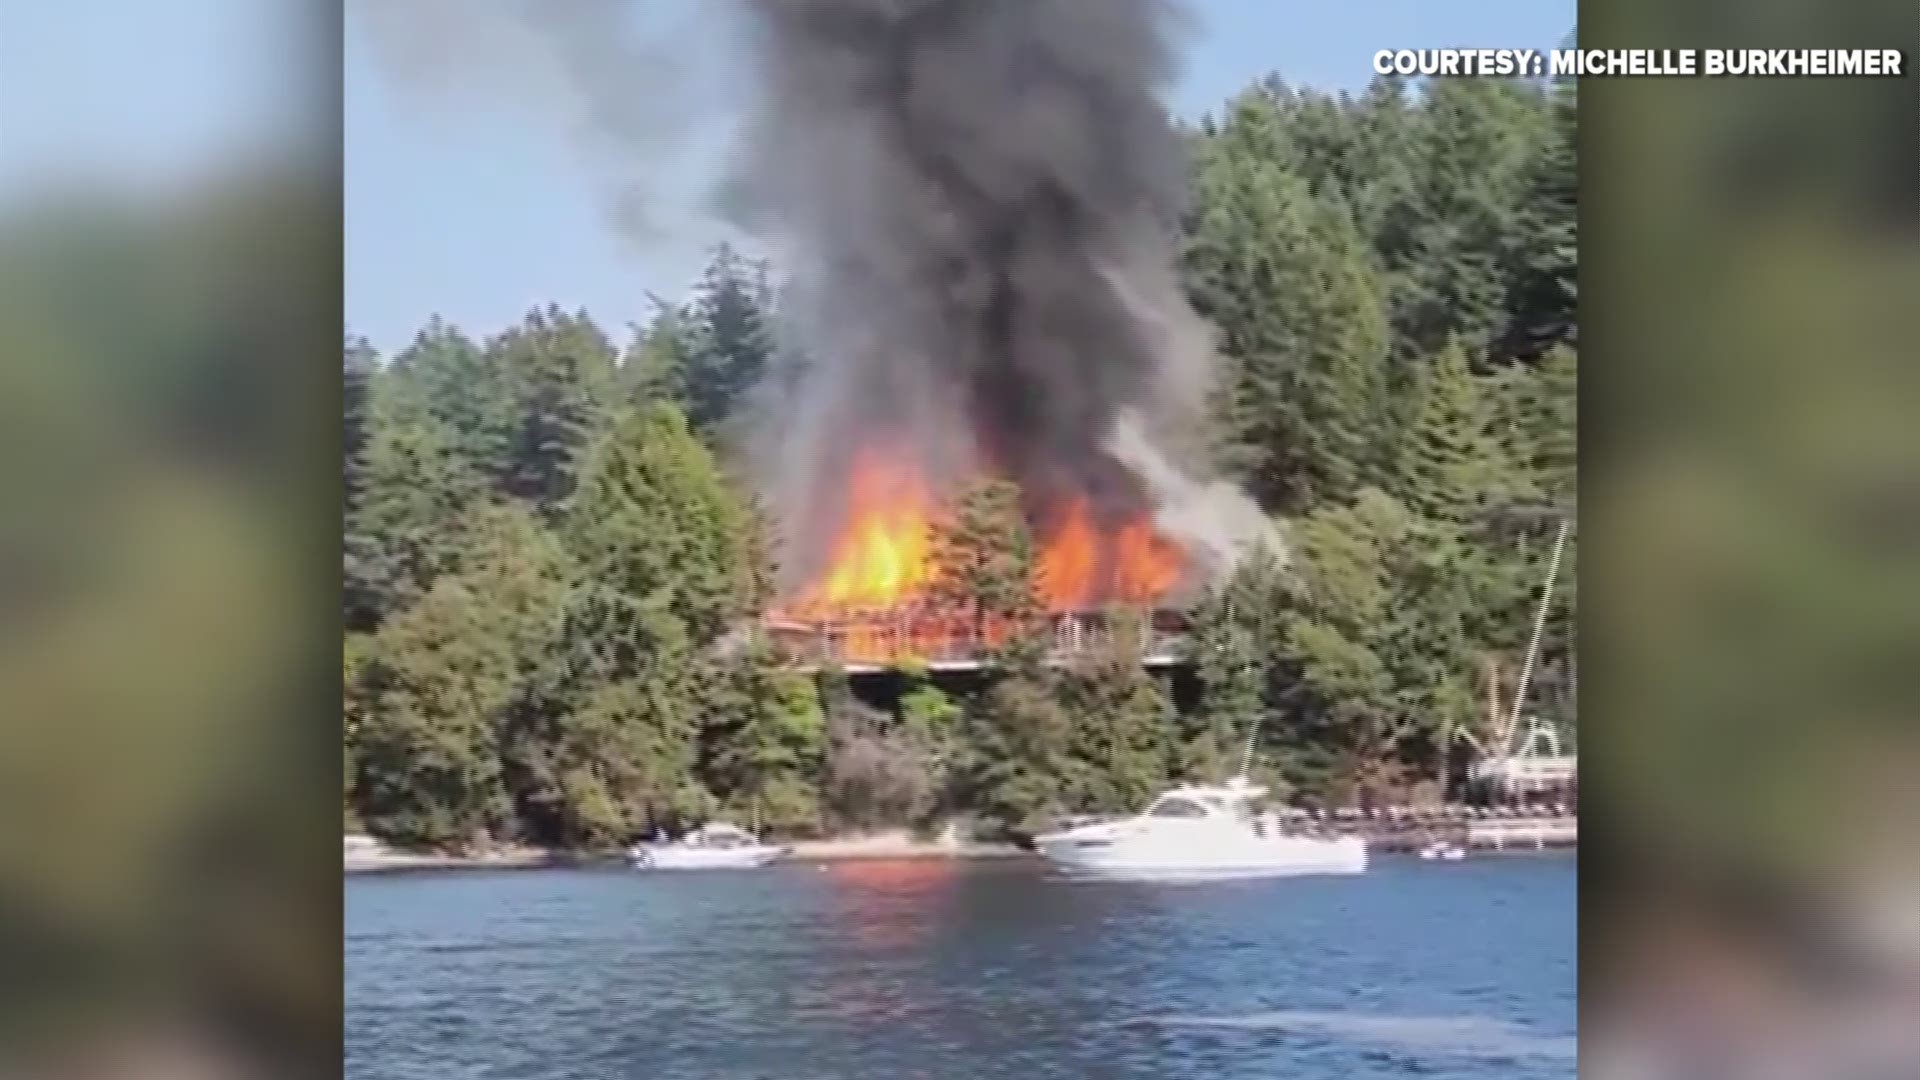 Video captured by Michelle Burkheimer shows flames taking over a house on Orcas Island Friday afternoon.